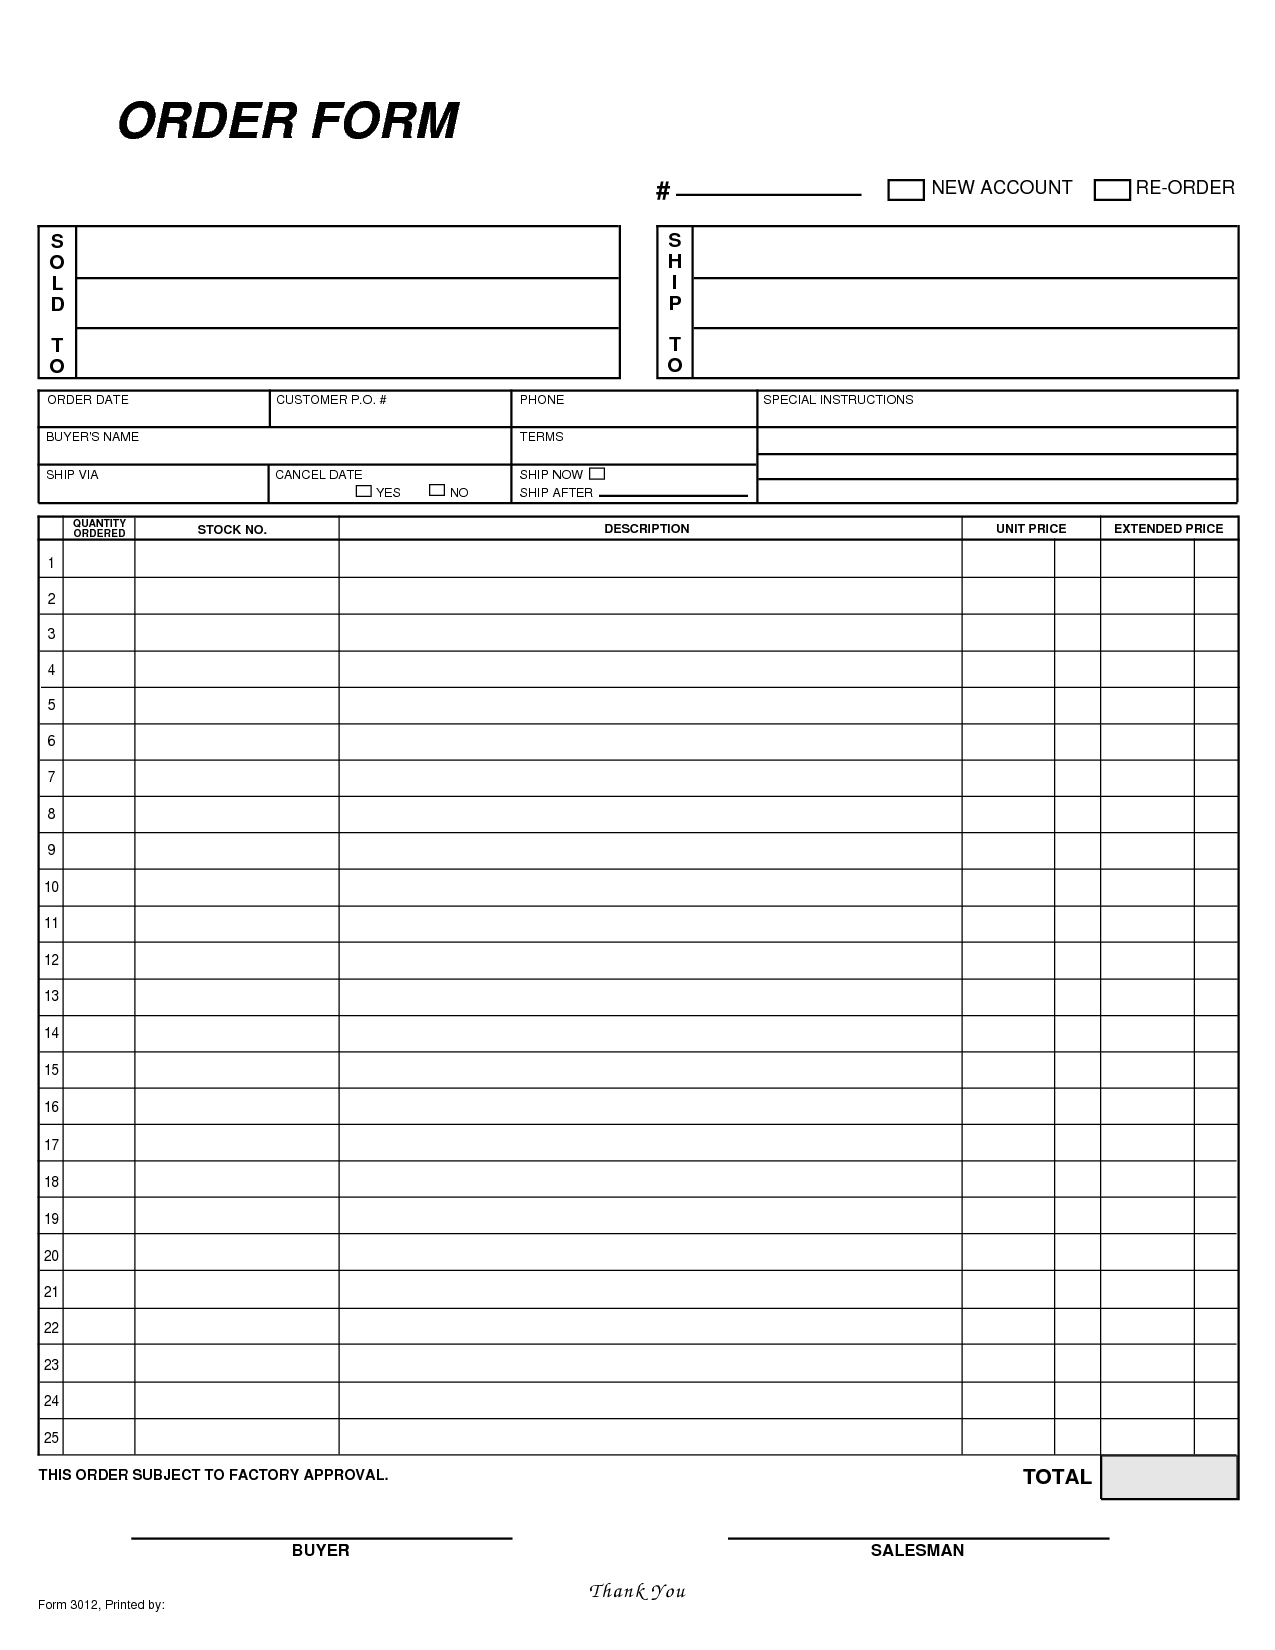 Free Printable Blank Order Forms - Demir.iso-Consulting.co - Free Printable Forms